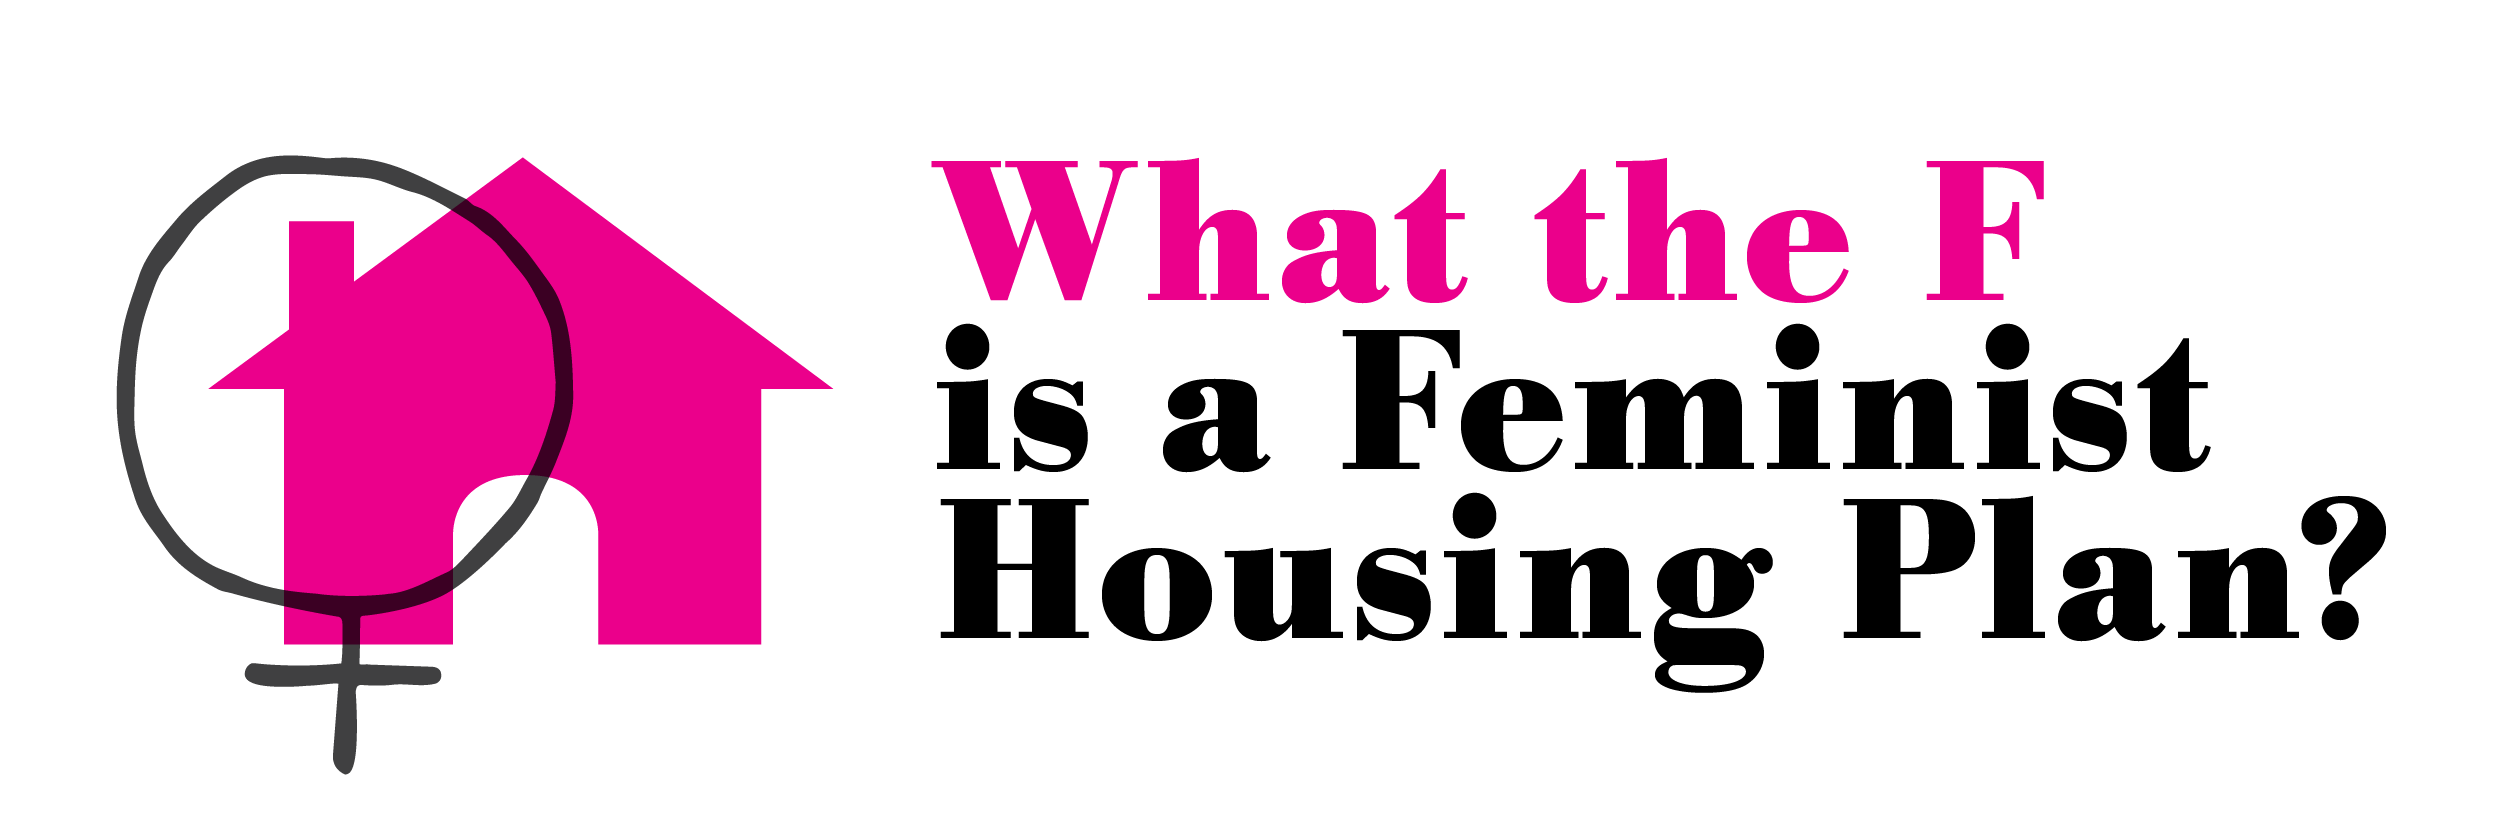 What the F is a Feminist Housing Plan